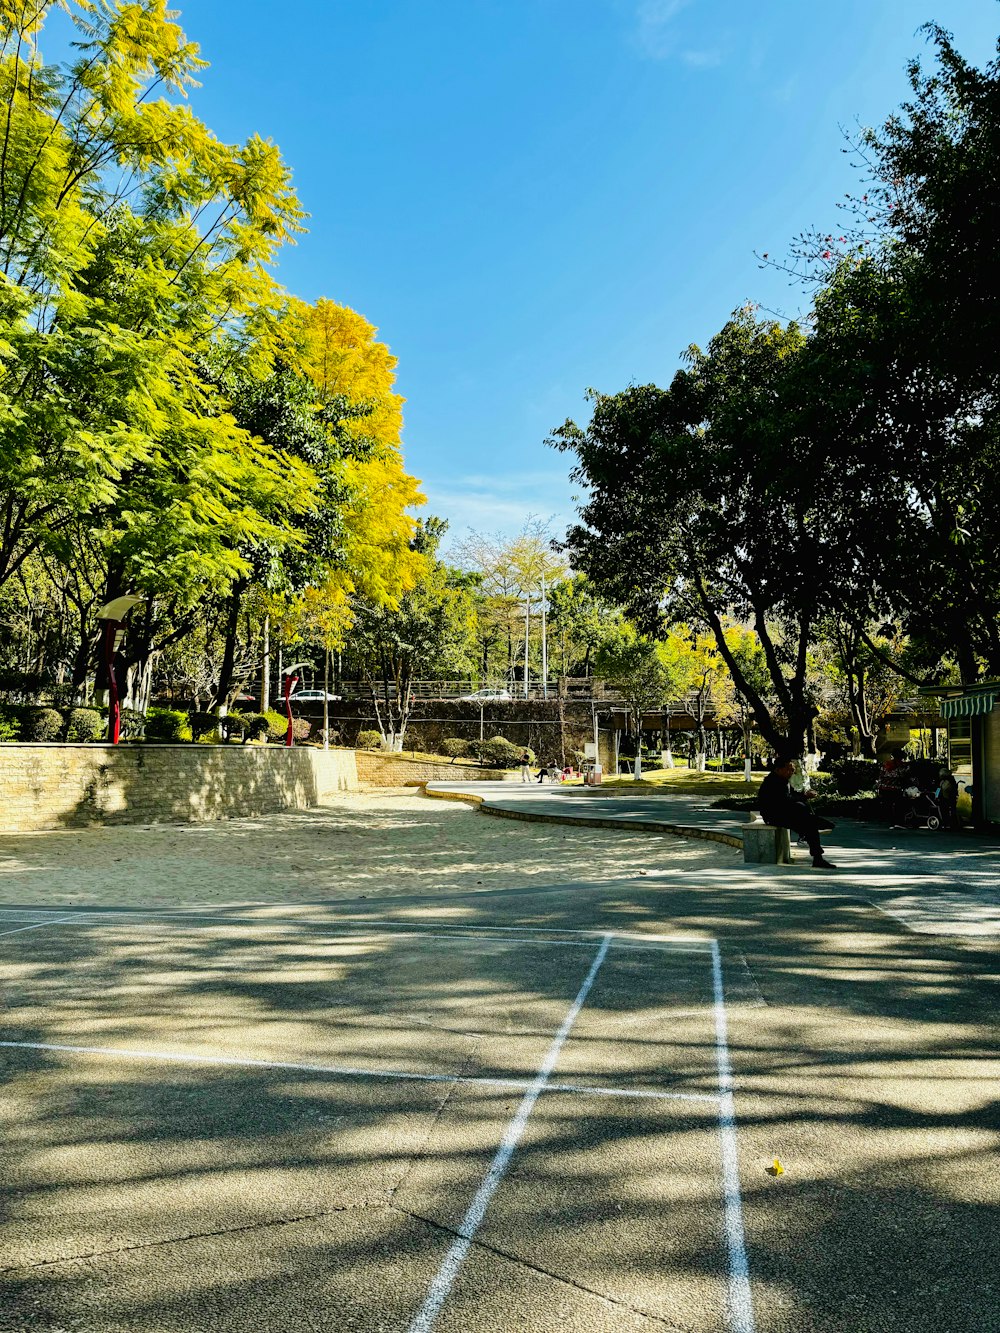 a tennis court surrounded by trees and a bridge